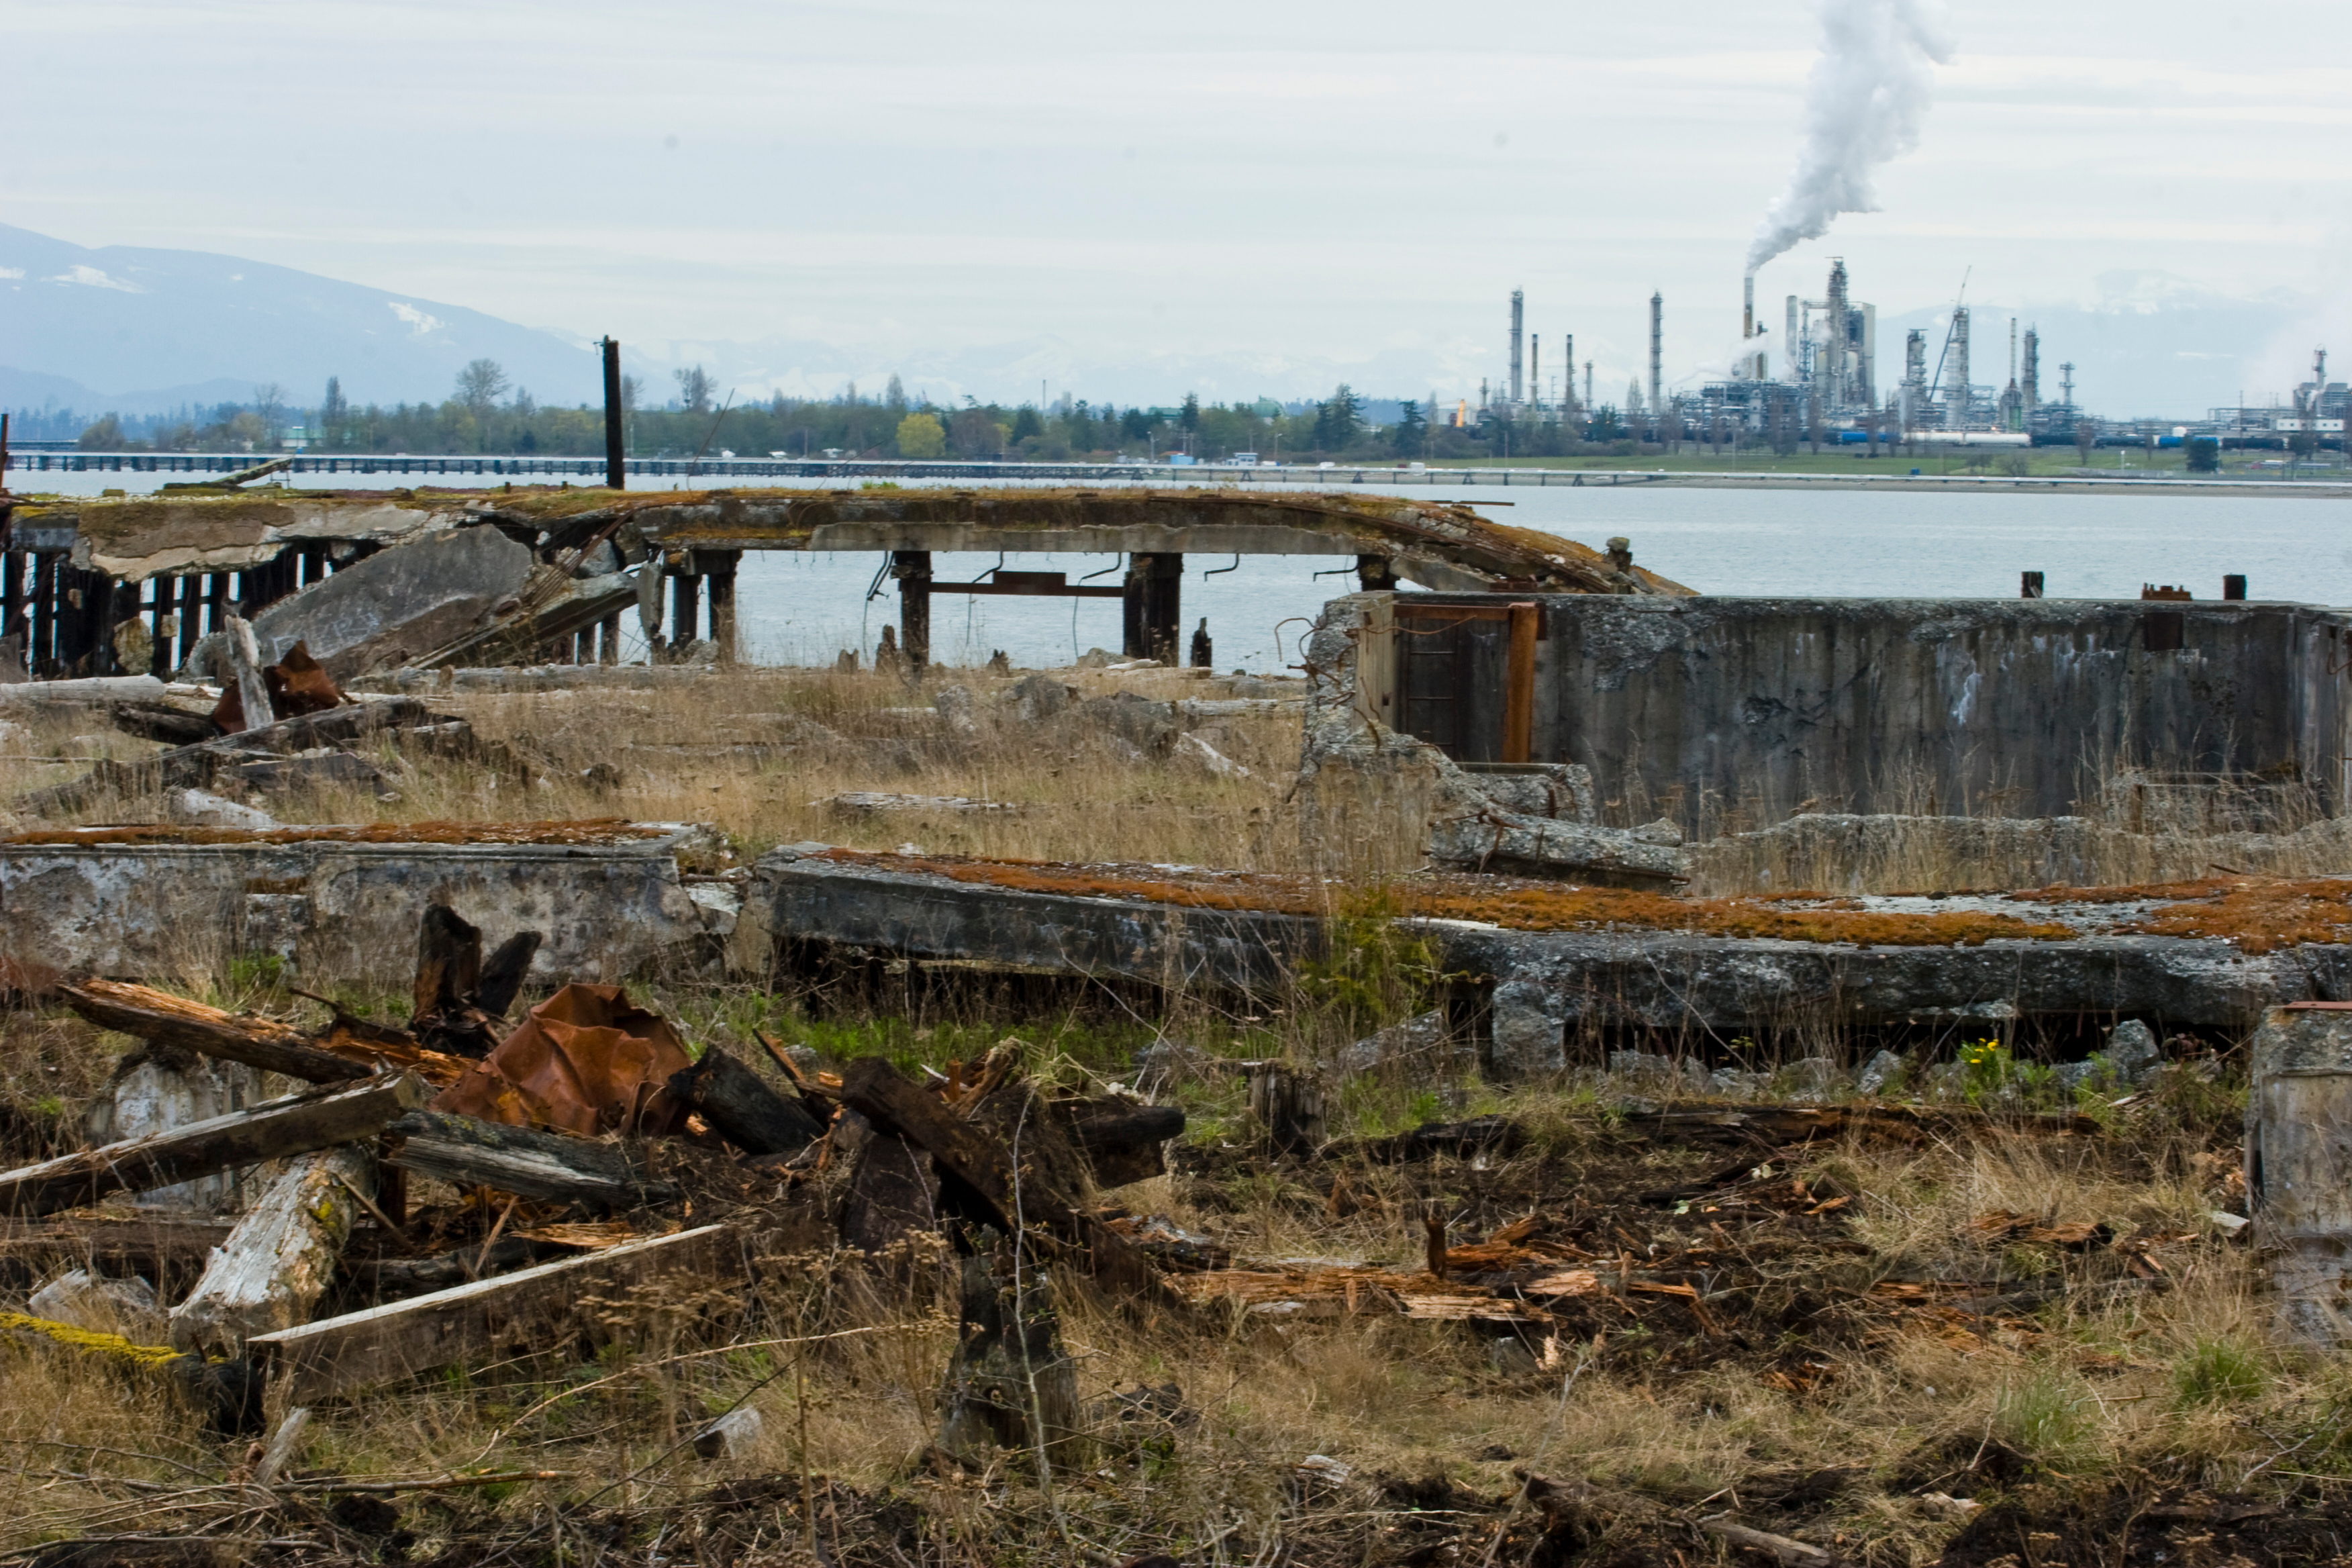 EPA's Superfund "Emphasis List" : Some New Questions